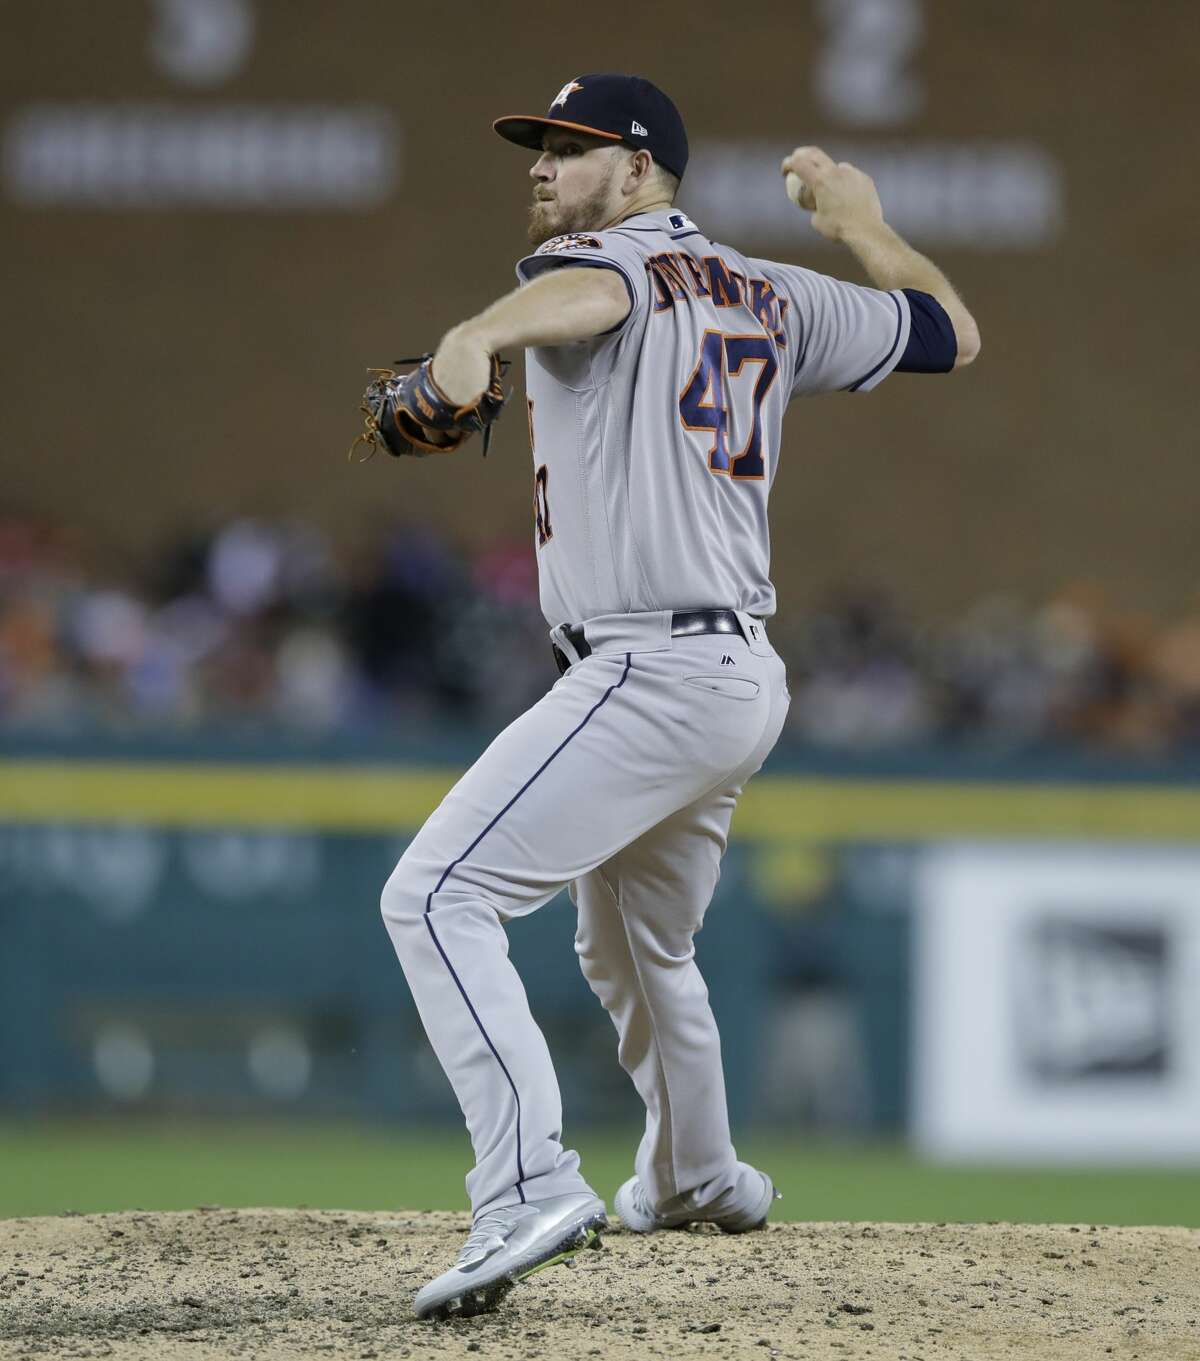 Astros relief pitcher Chris Devenski has struggled recently with command of his fastball and slider. He has given up seven runs in his last 9 2/3 innings.